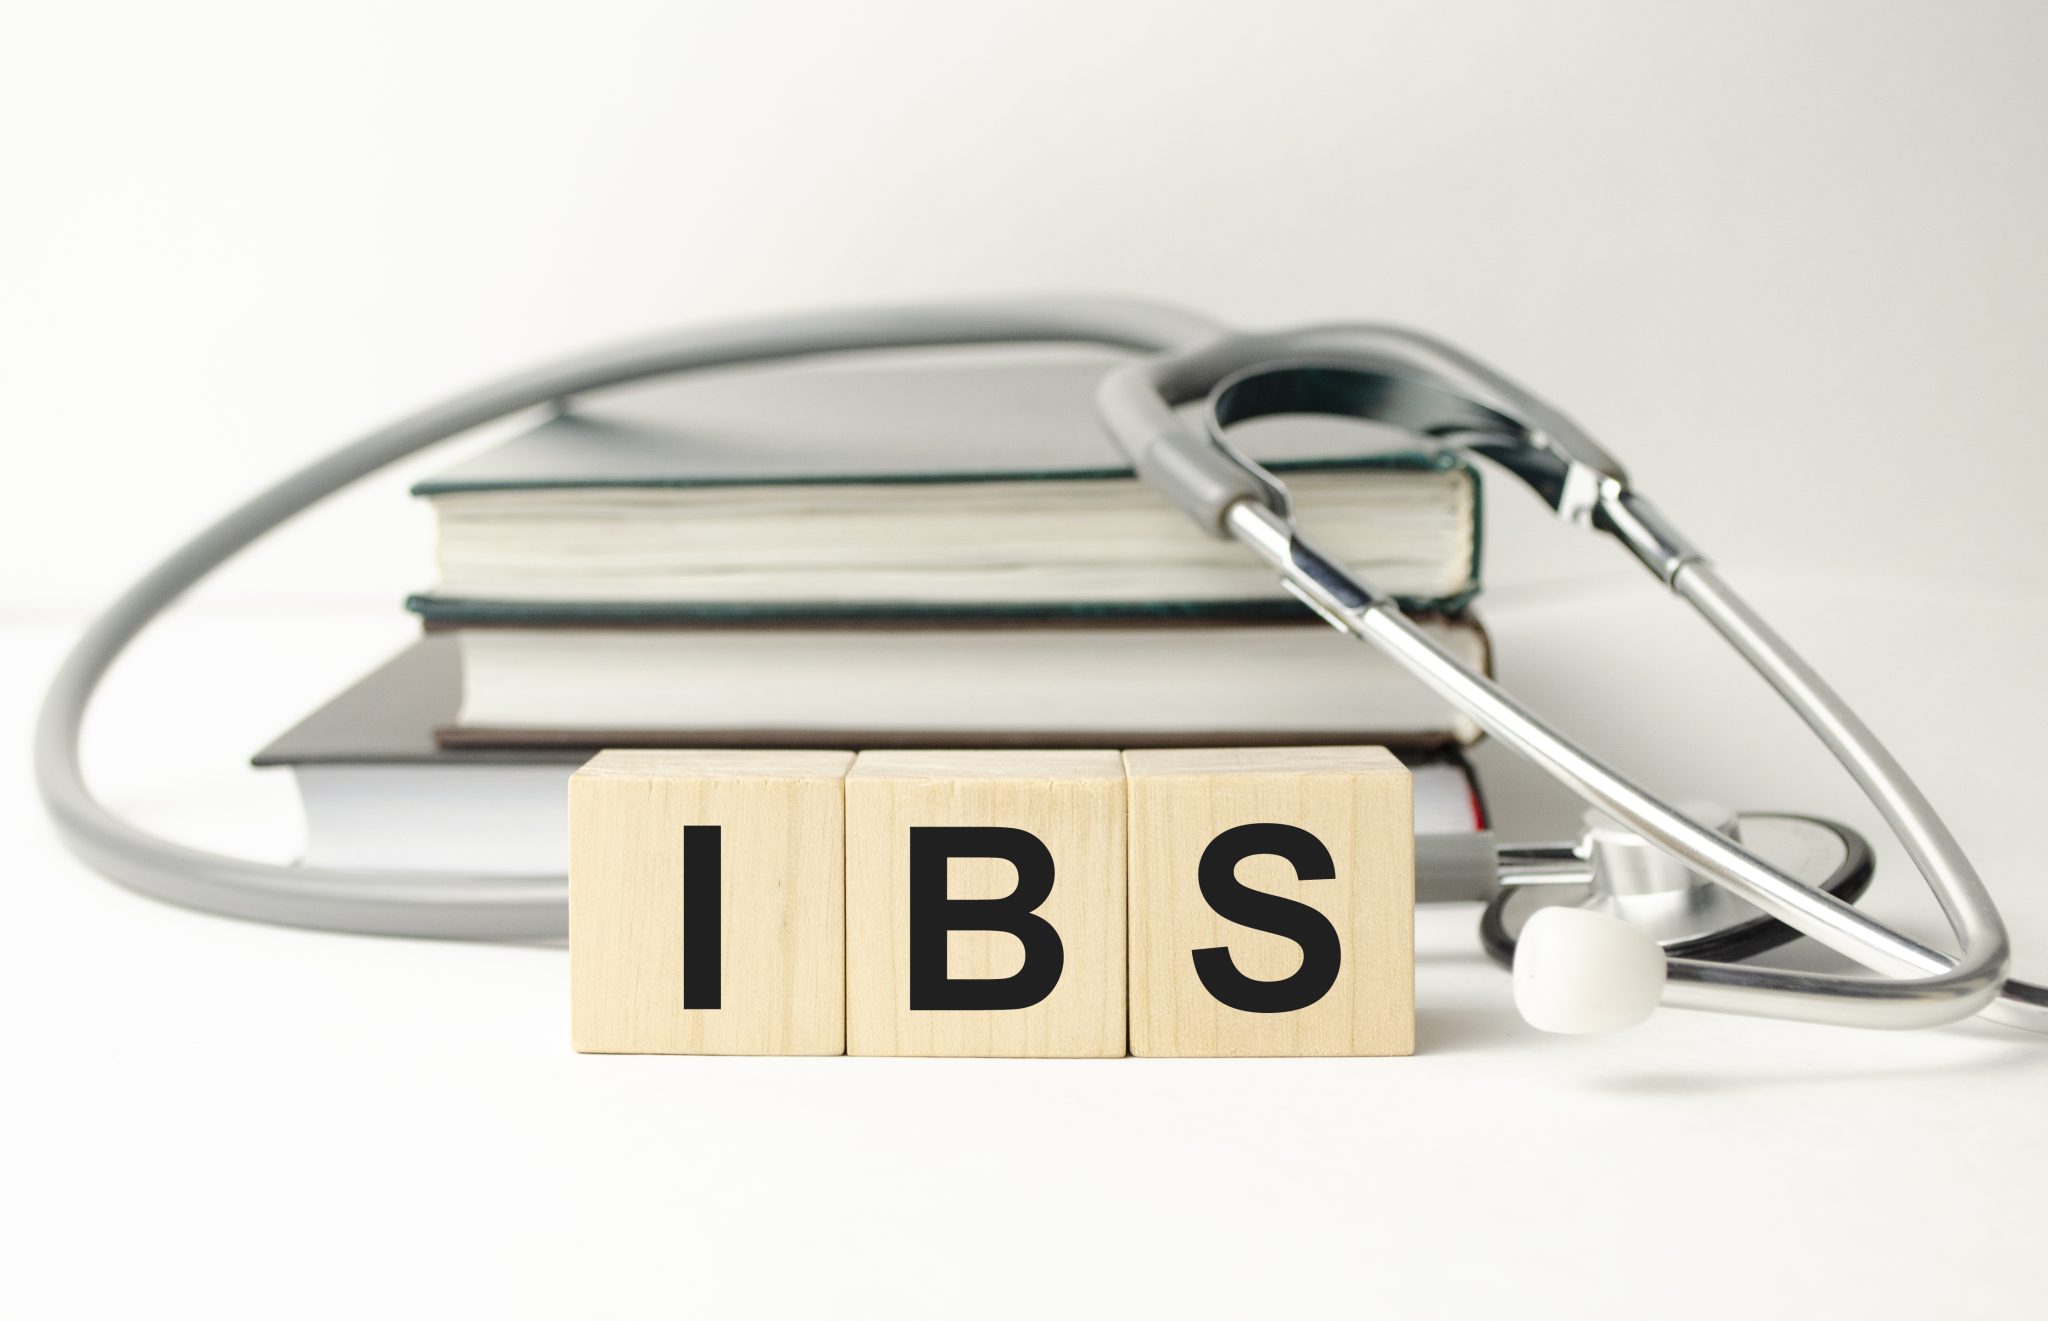 ibs and semaglutide